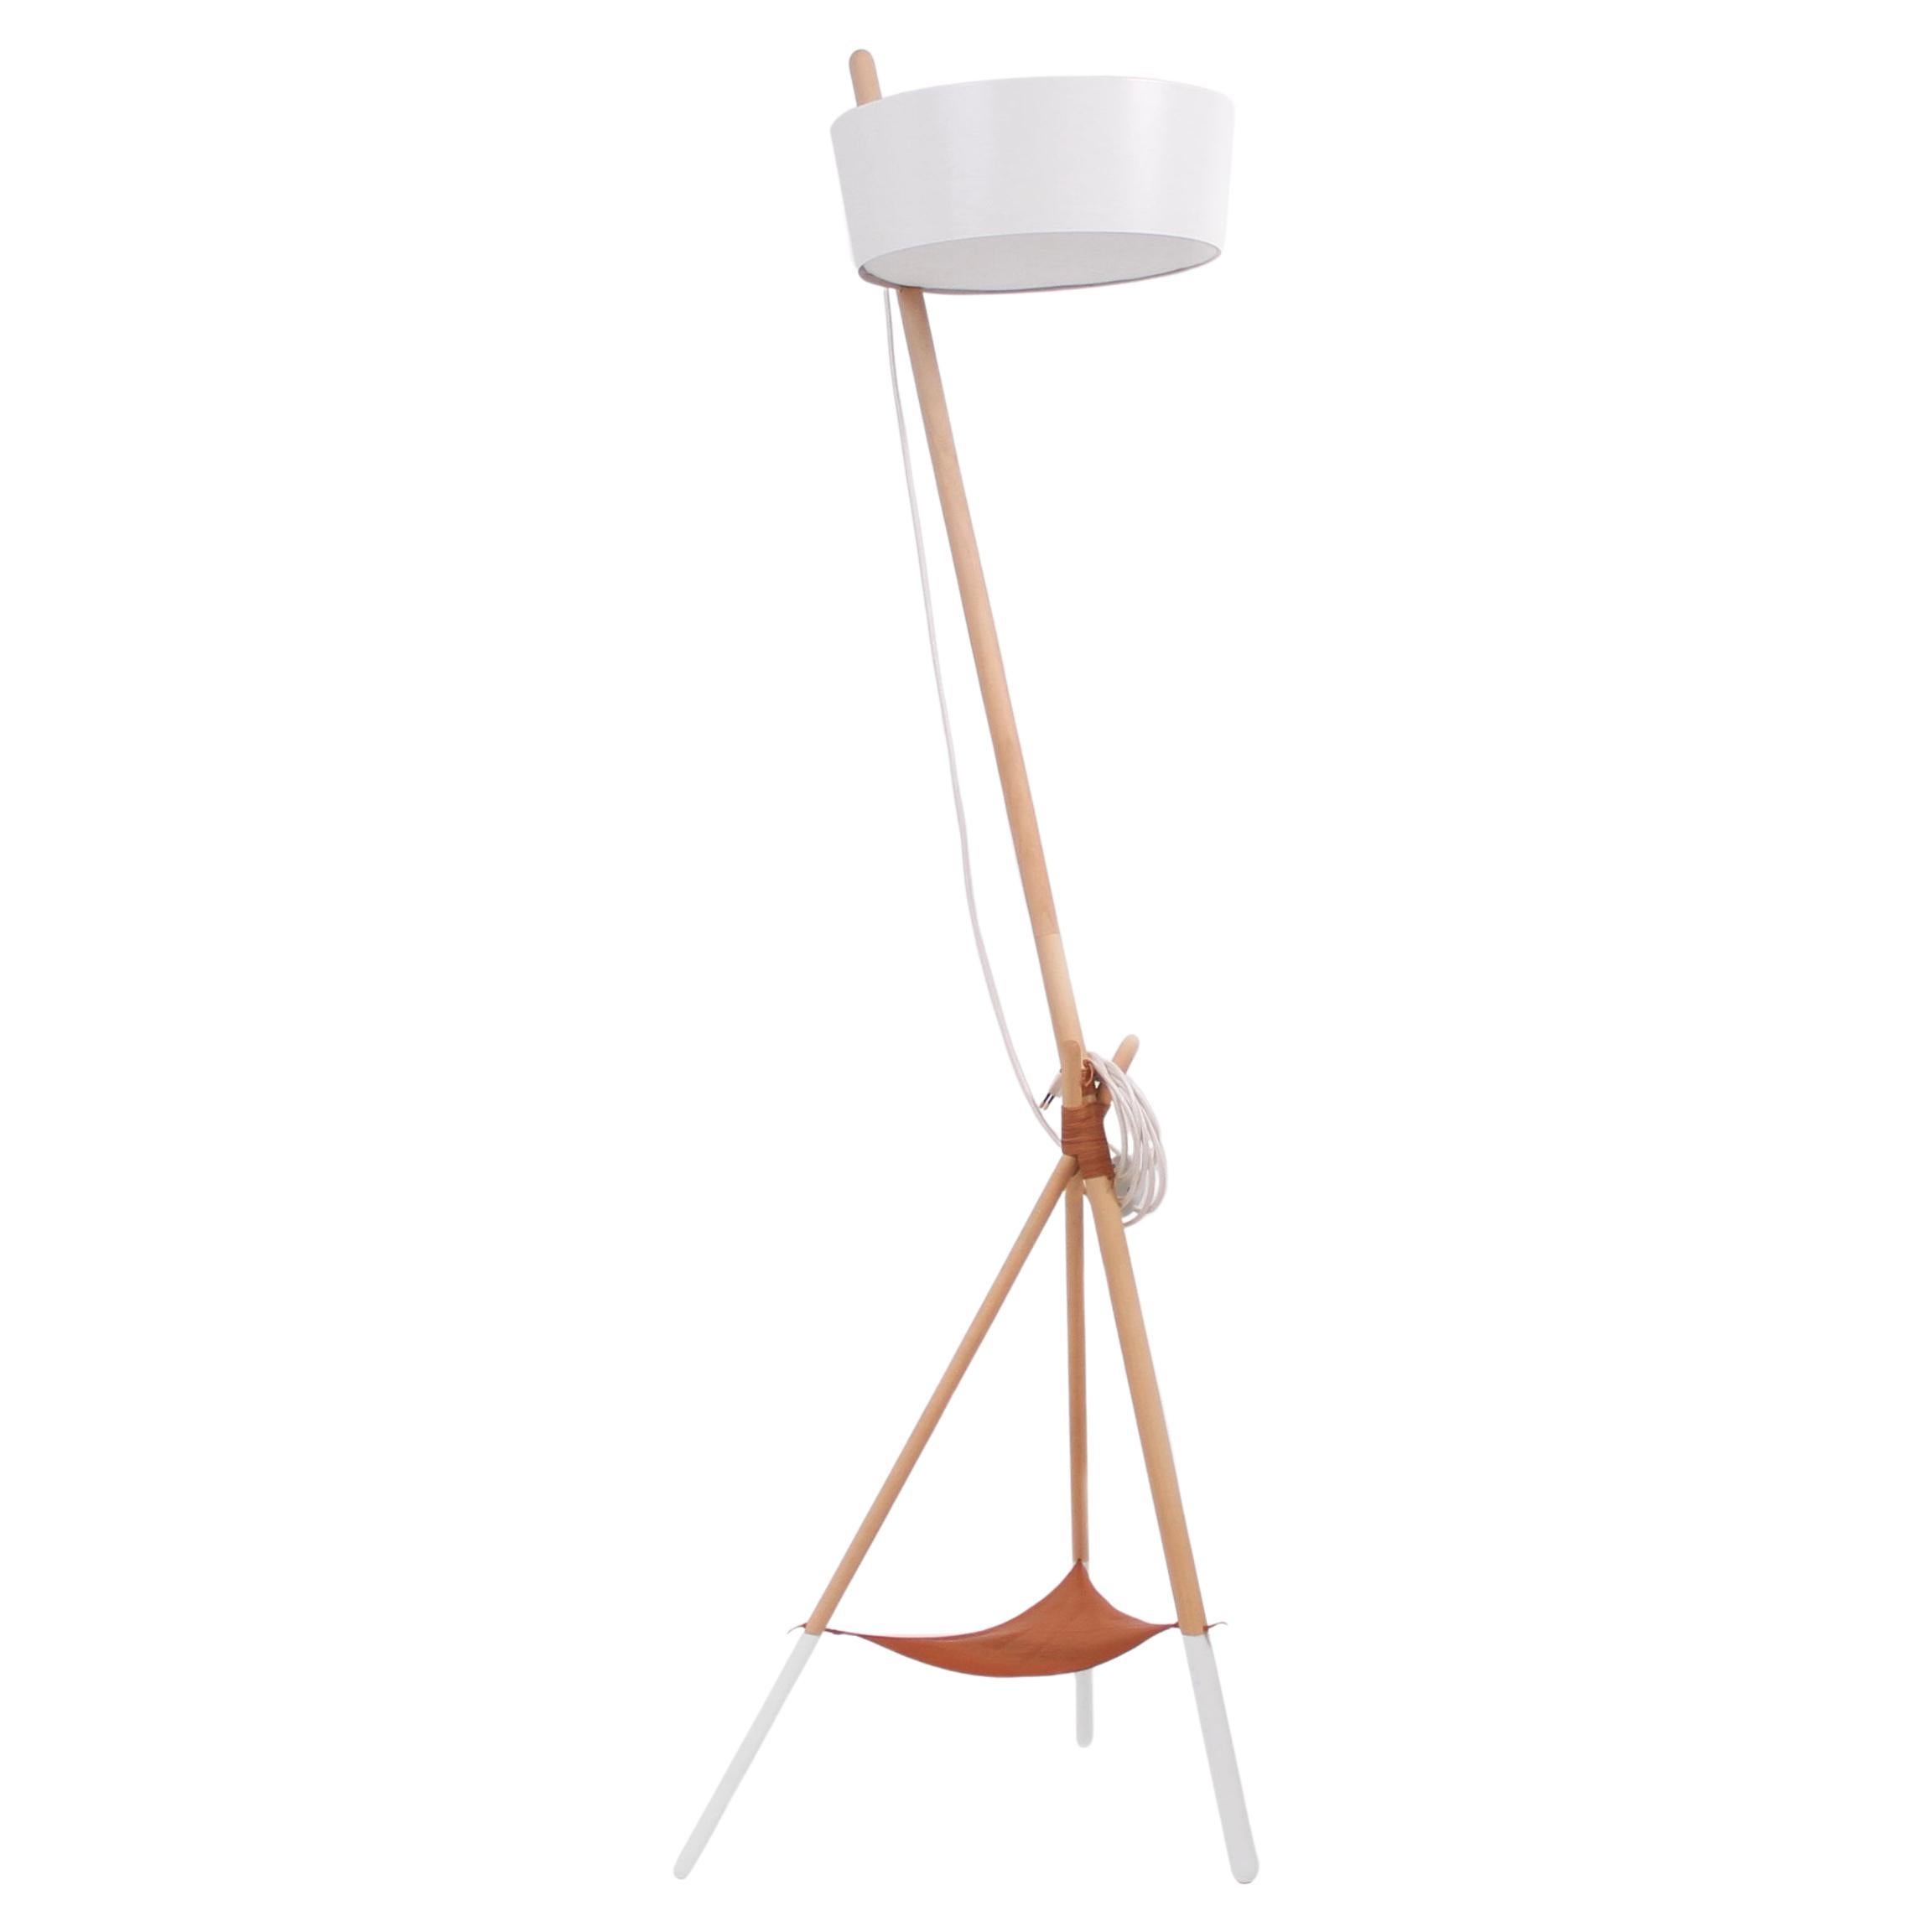 Ka XL ambient floor lamp with tray · White & beech For Sale